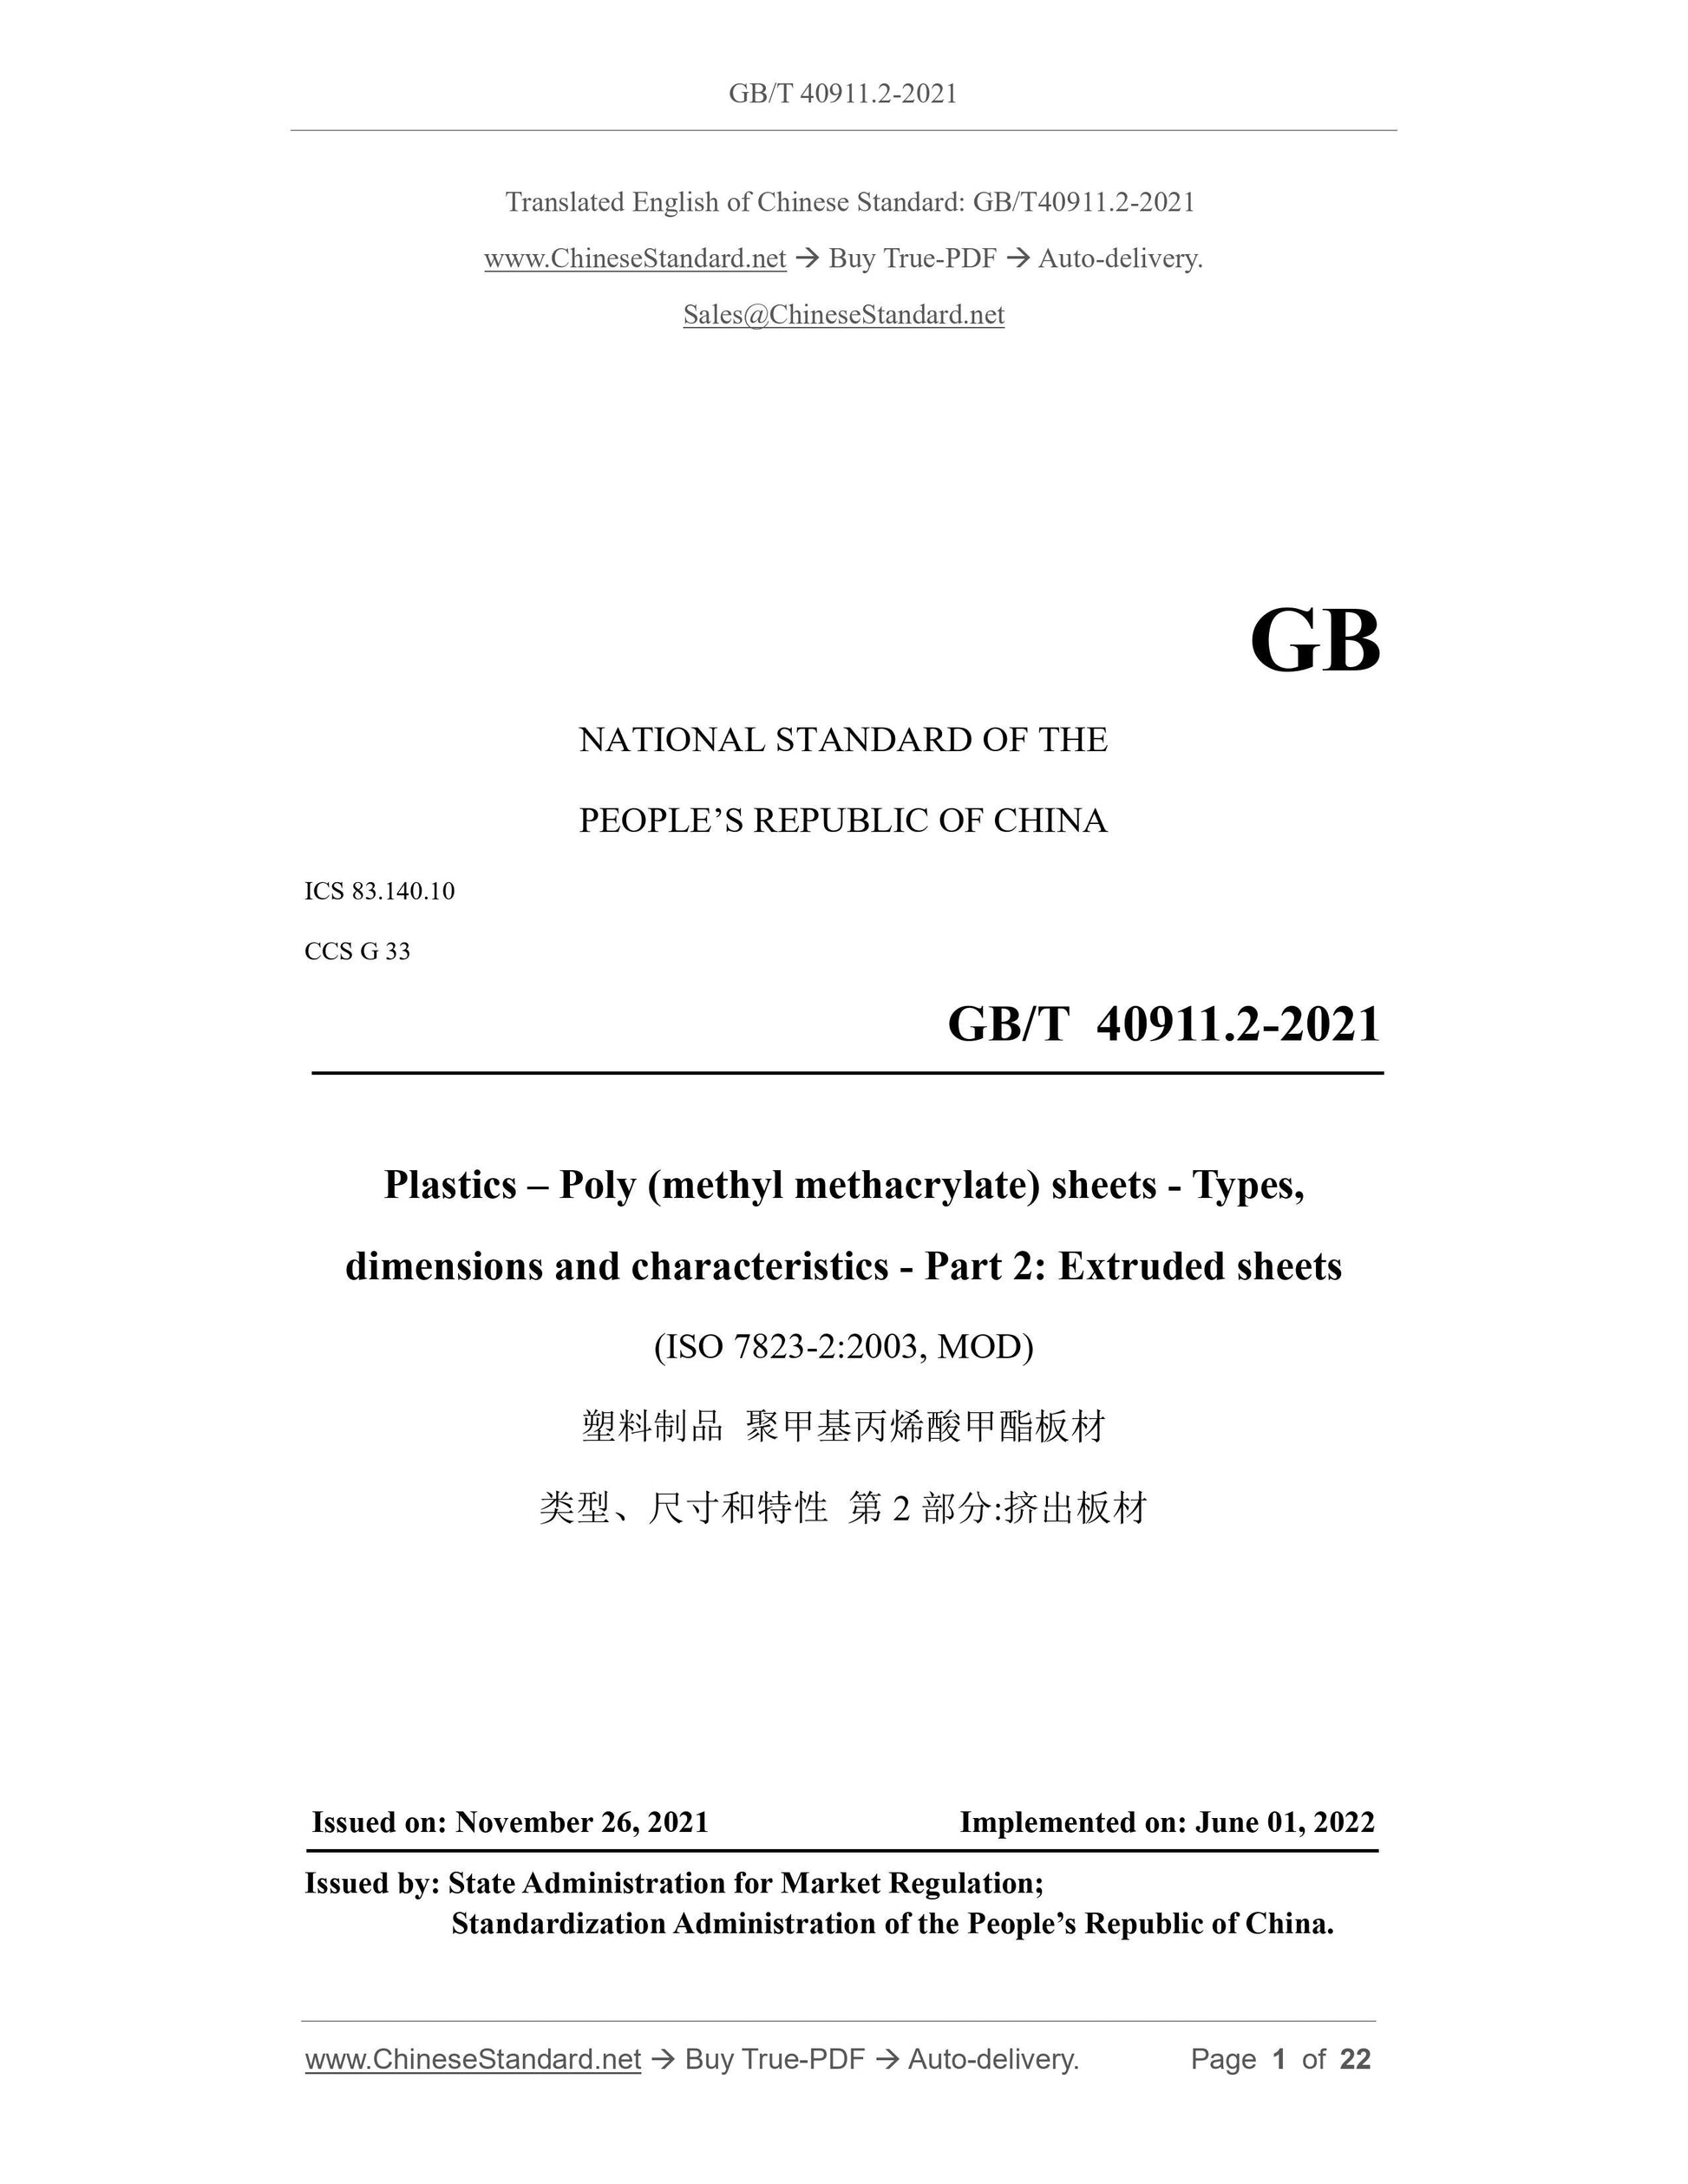 GB/T 40911.2-2021 Page 1